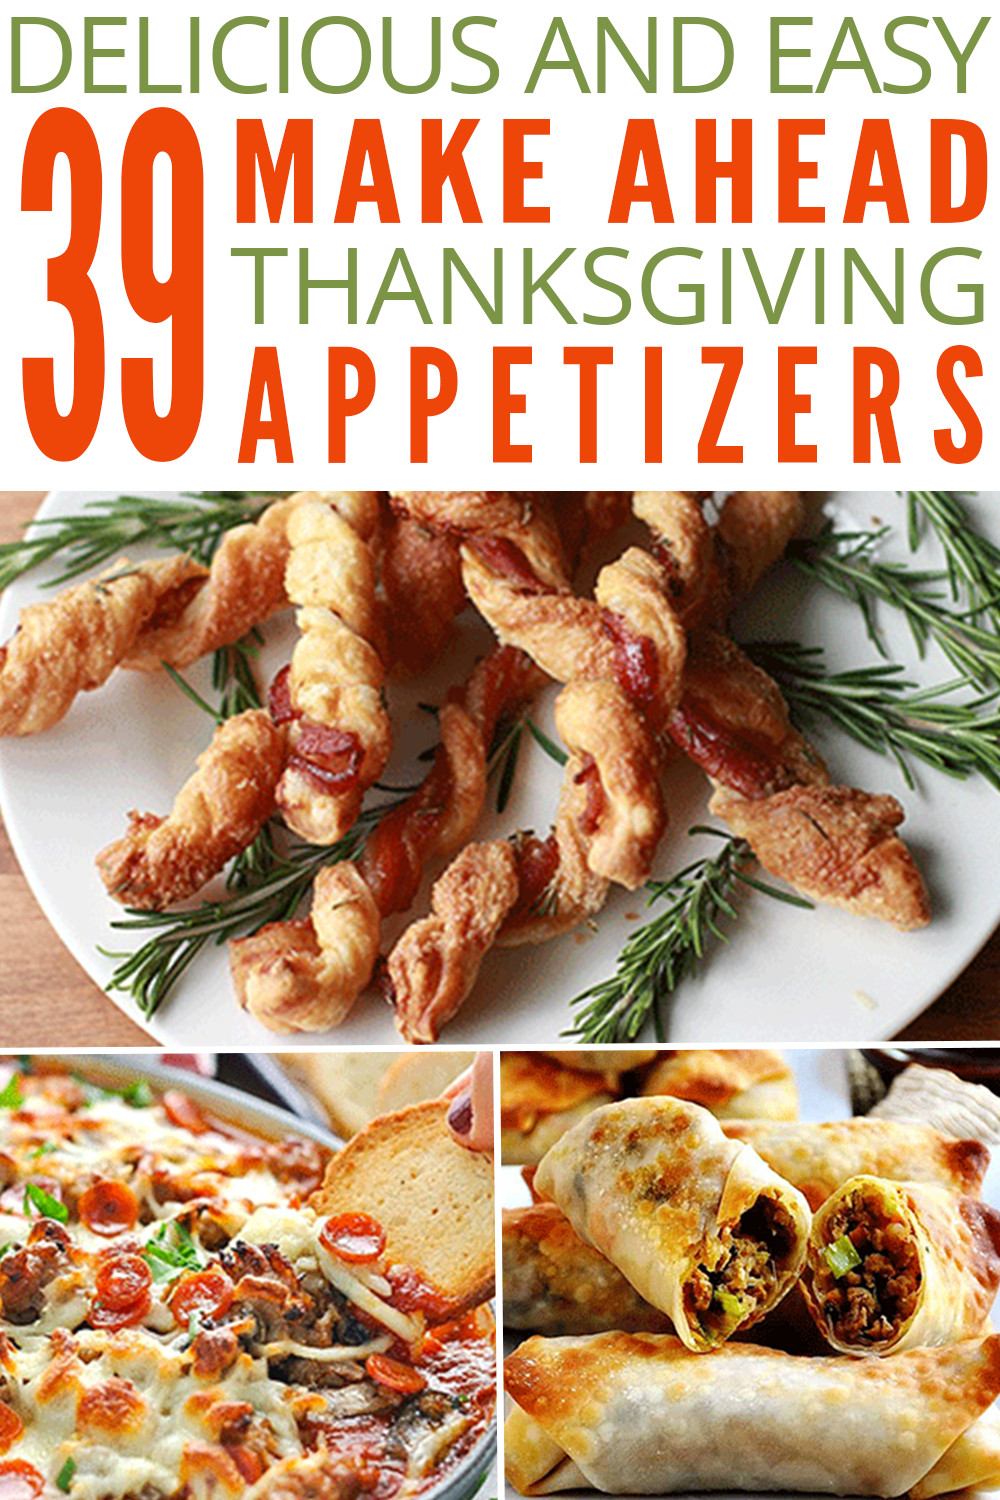 Make Ahead Vegetarian Appetizers
 39 Easy and Delicious Make Ahead Thanksgiving Appetizers